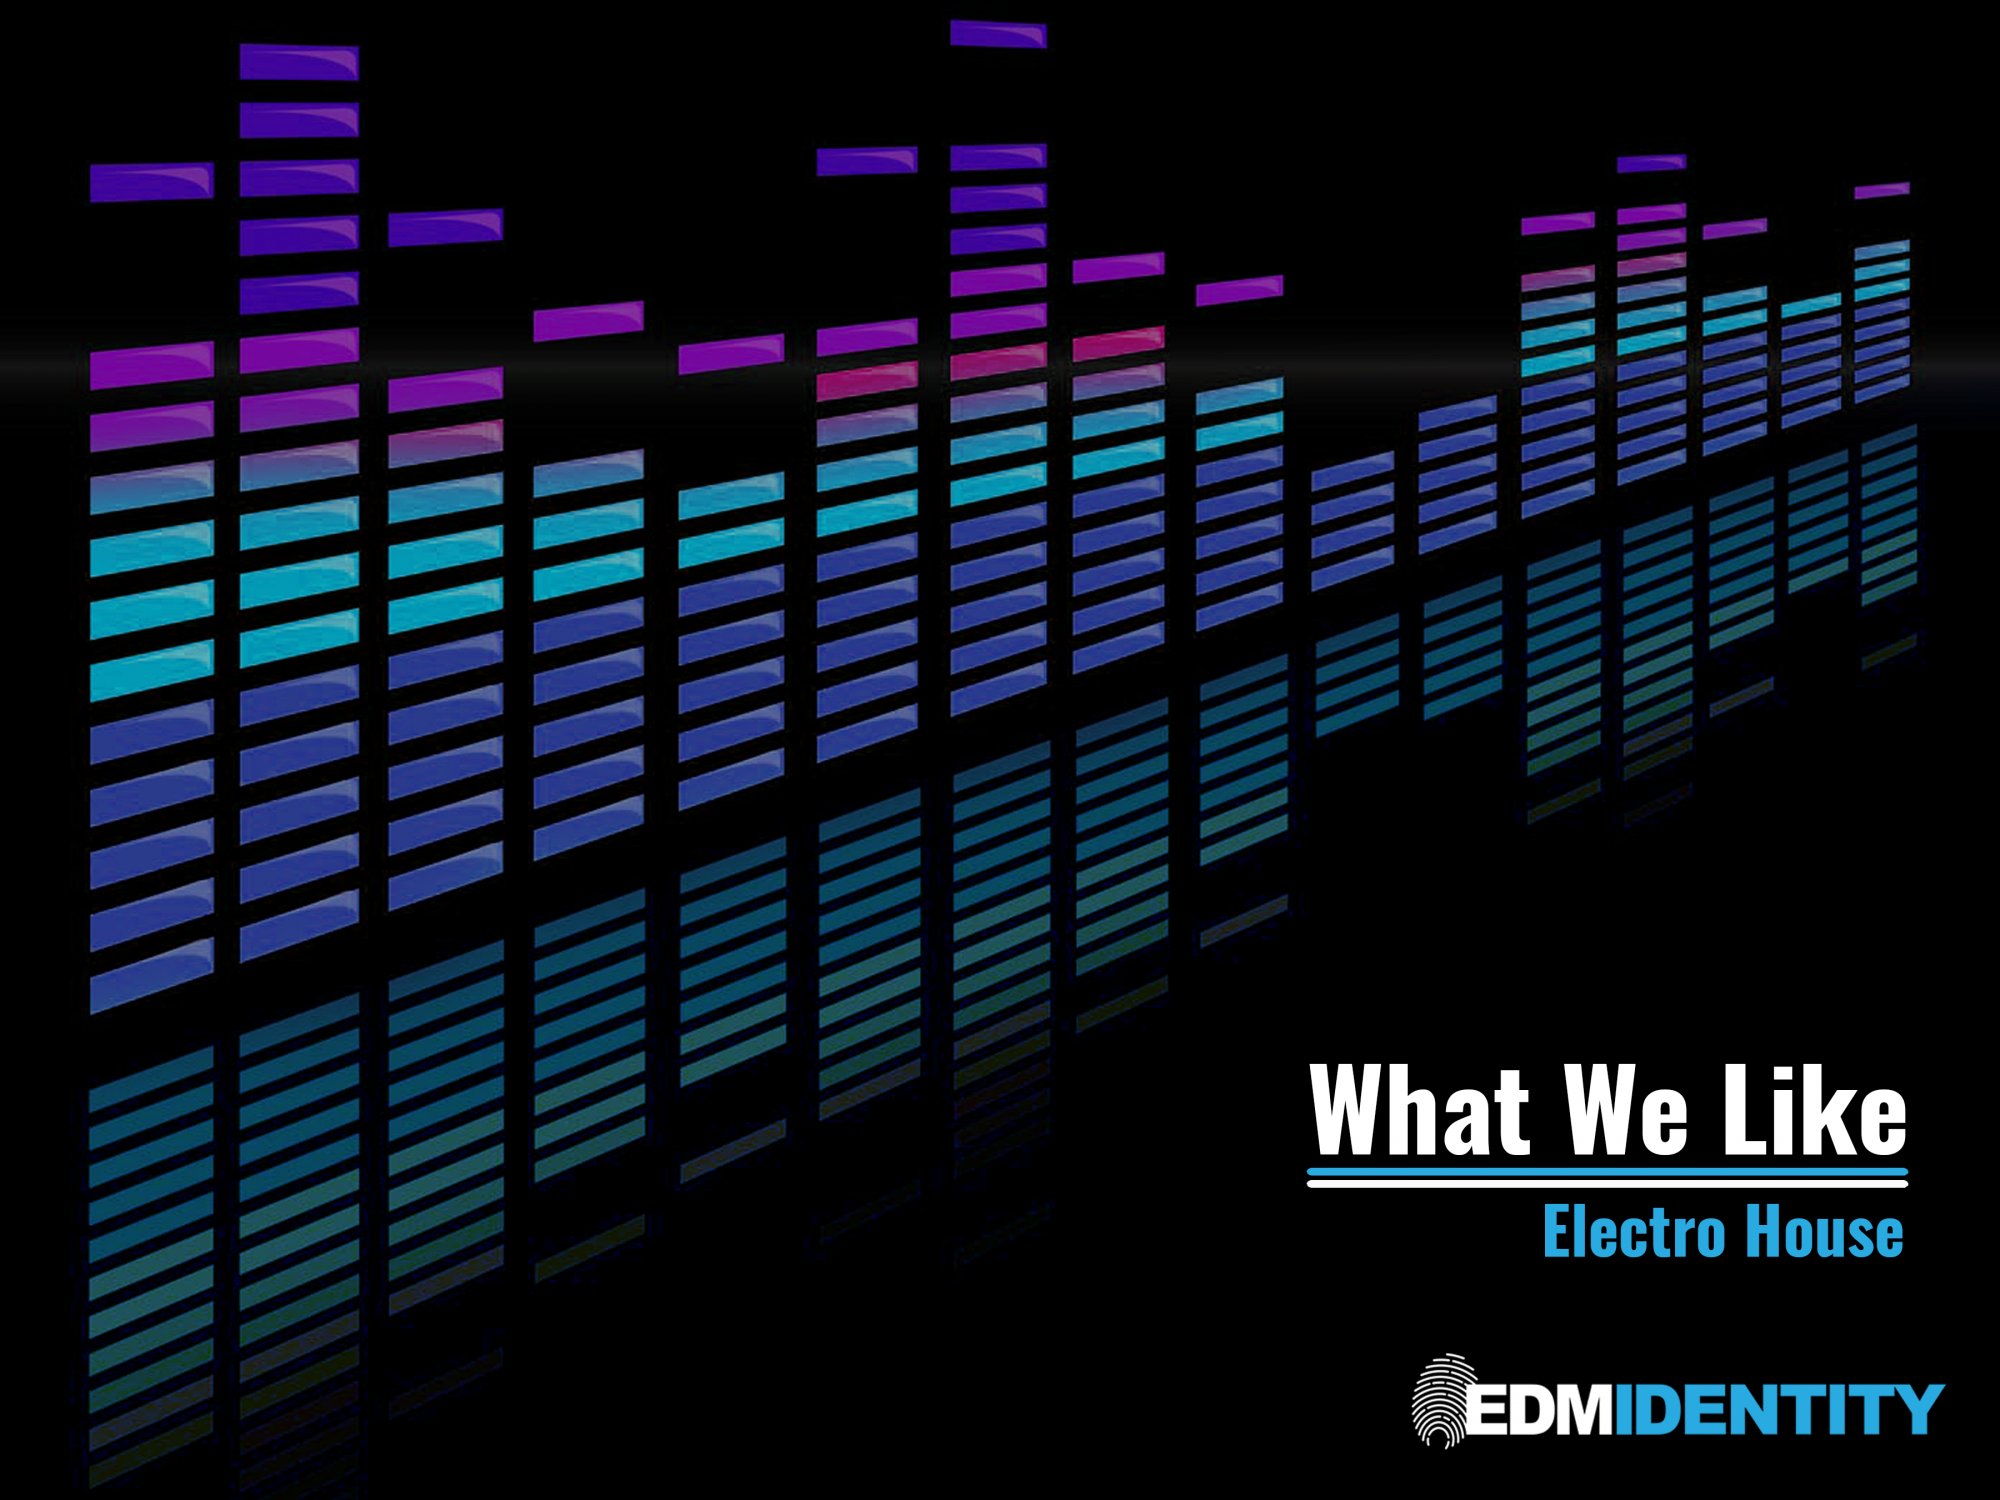 What We Like - Electro House (4x3)